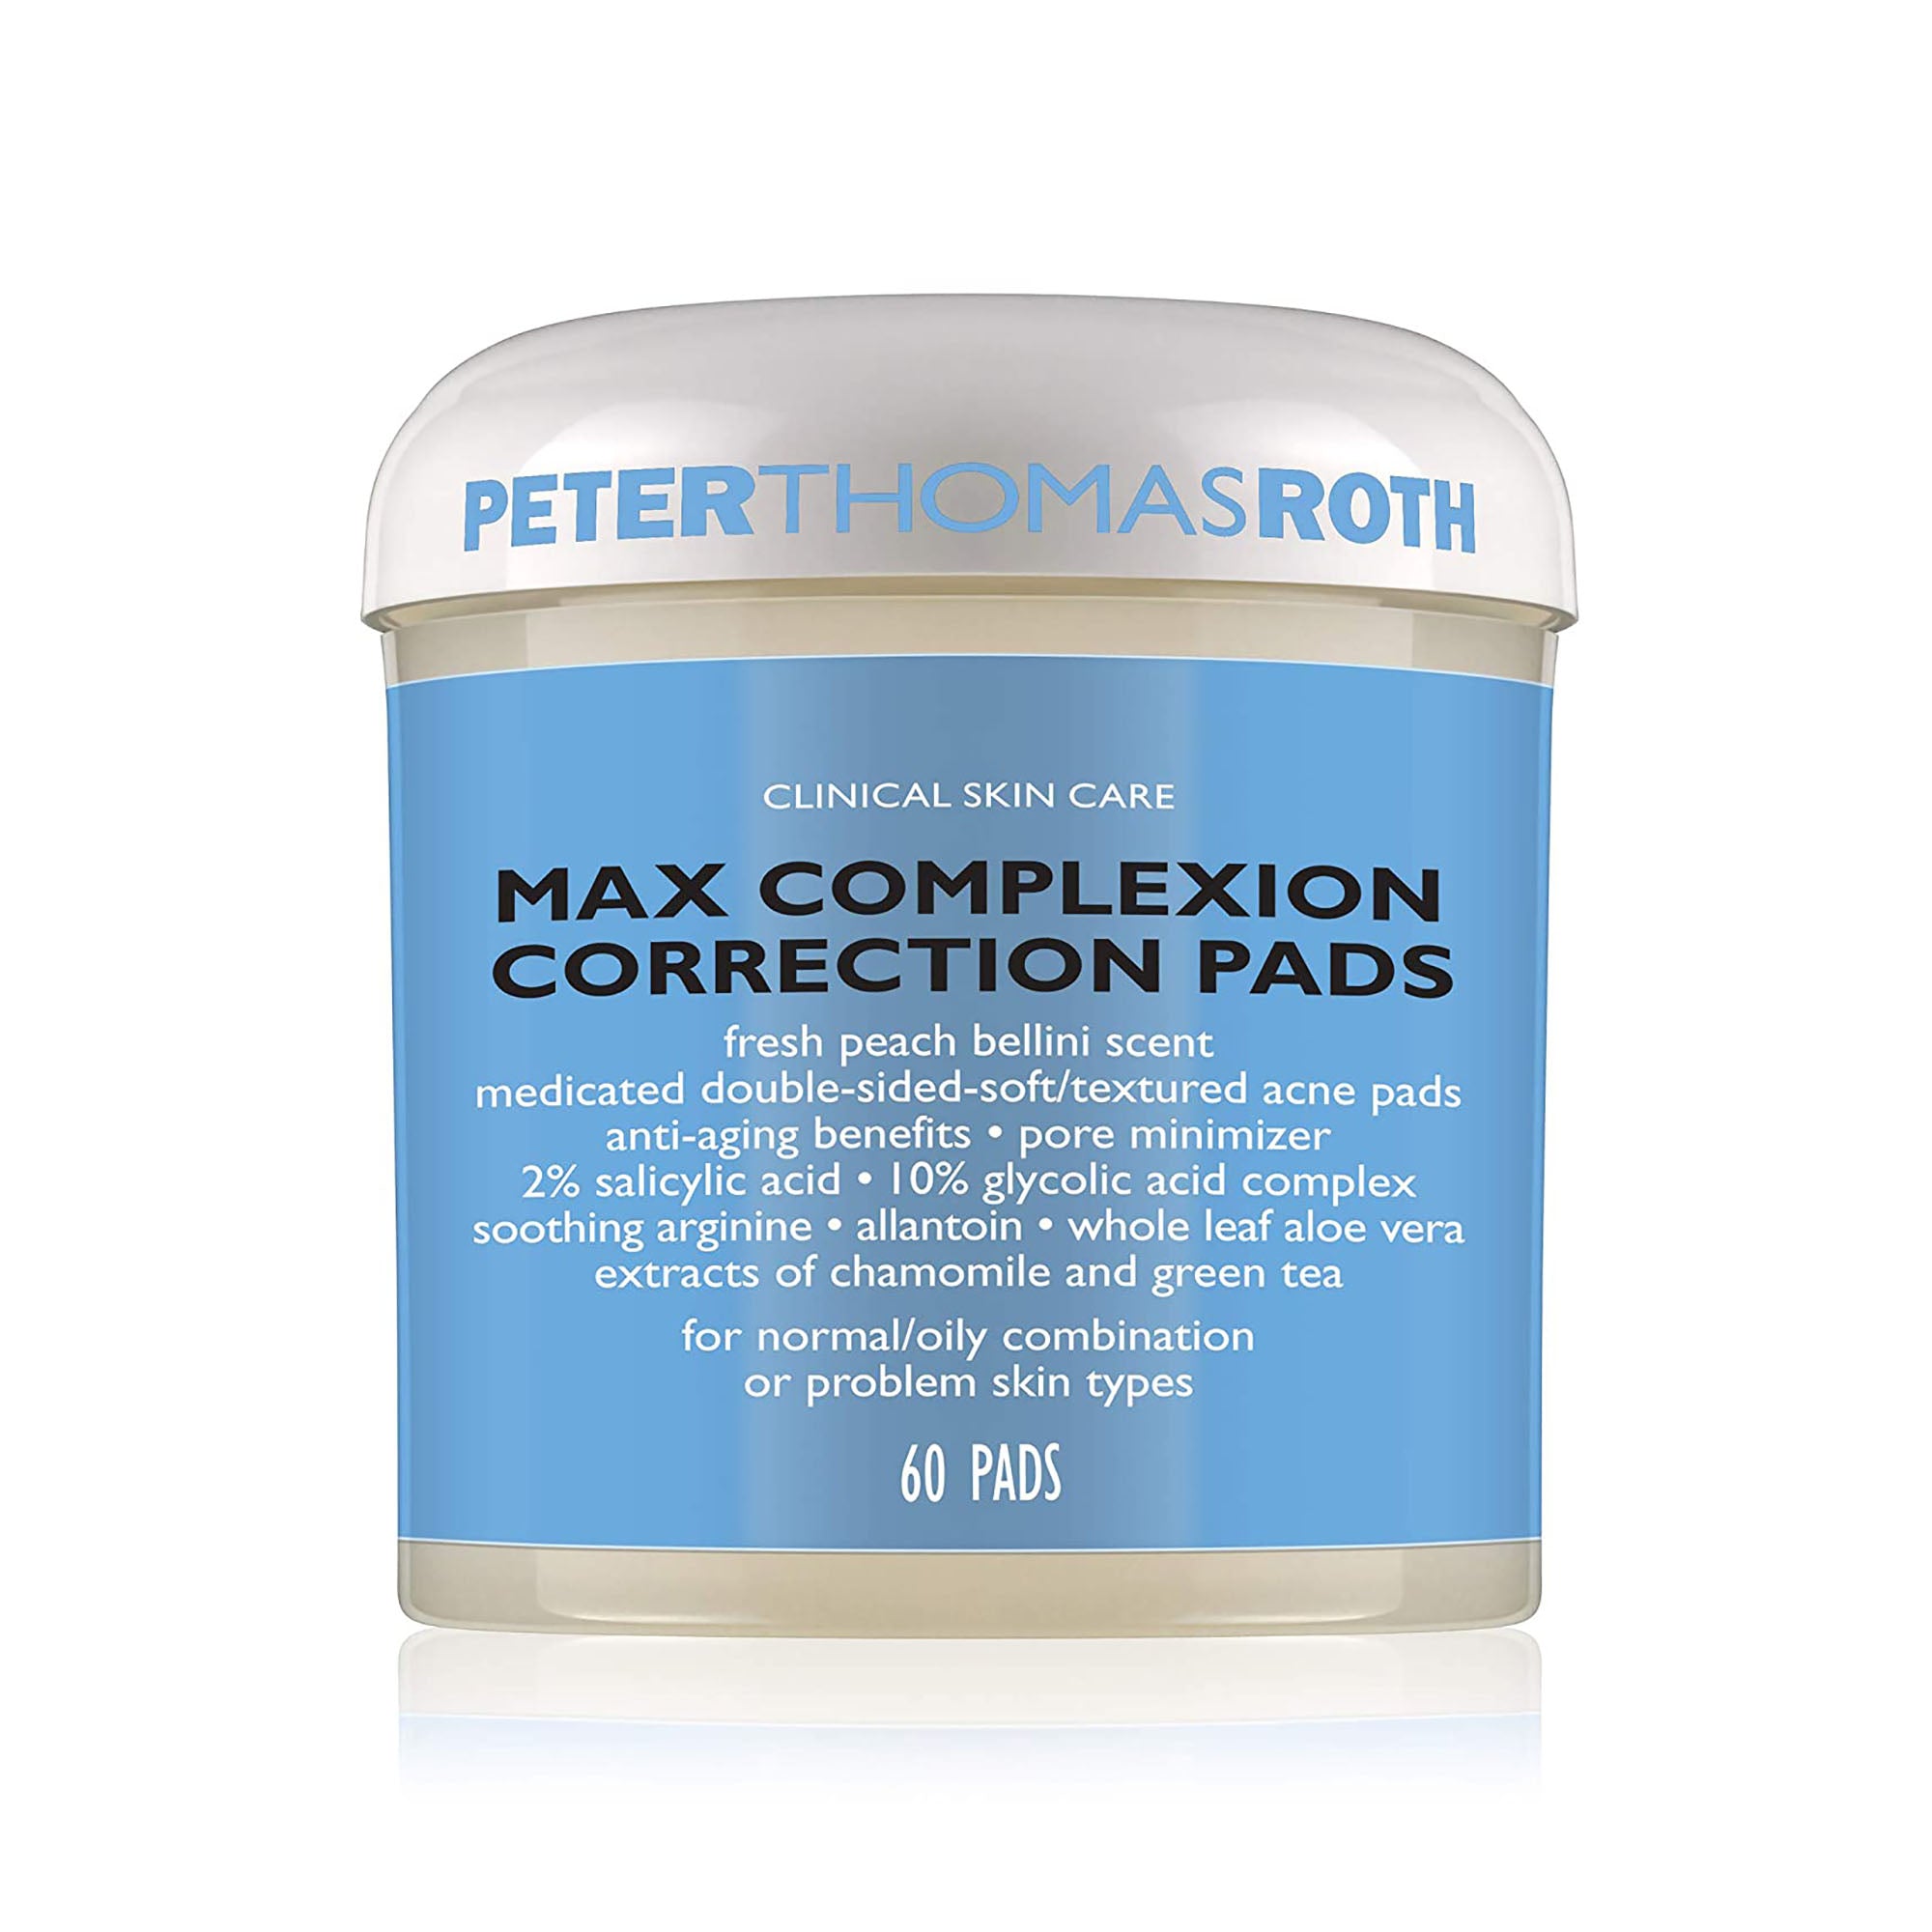 Peter Thomas Roth Max Complexion Correction Pads / 60